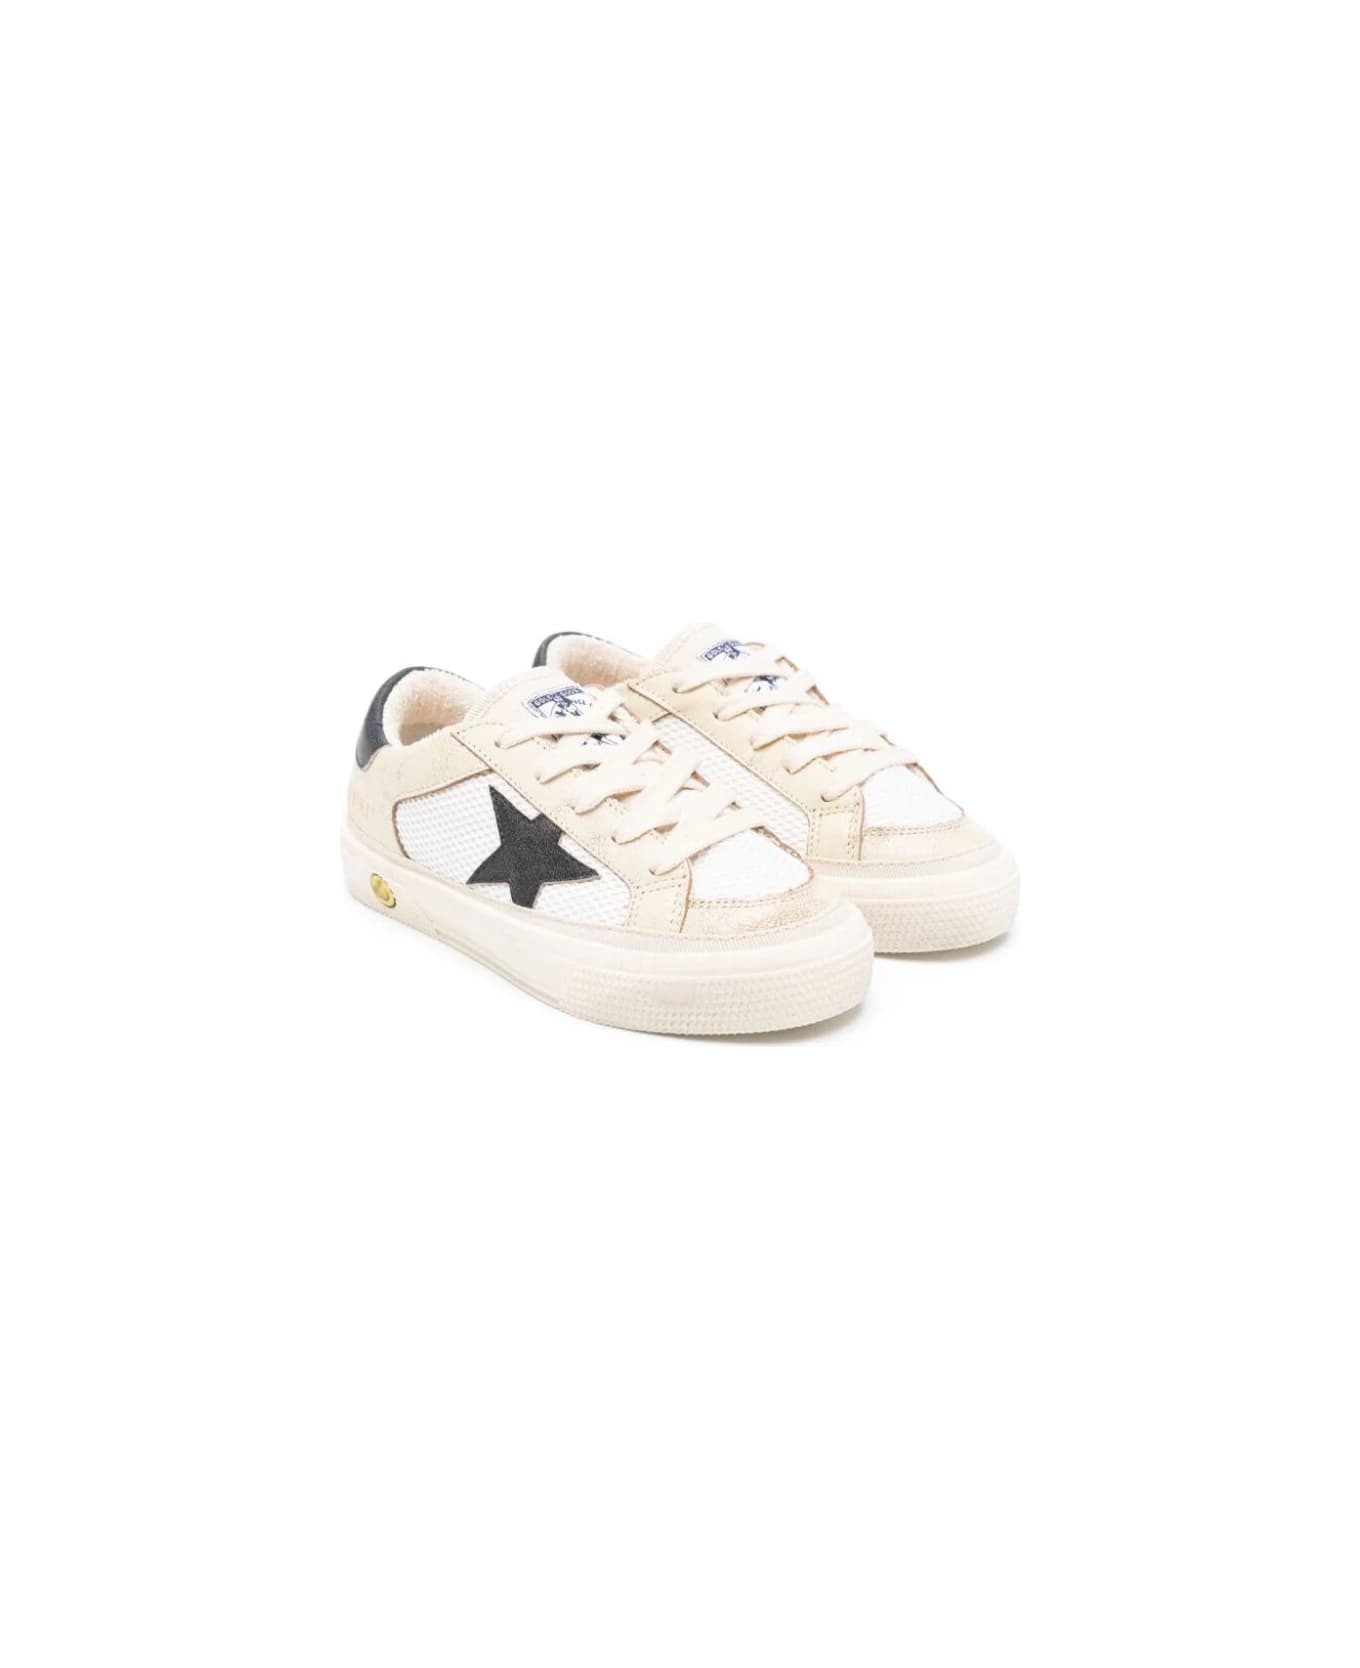 Golden Goose May Nappa Net And Leather Upper Nylon Tongue Leather Toe Star And Heel - White Blue